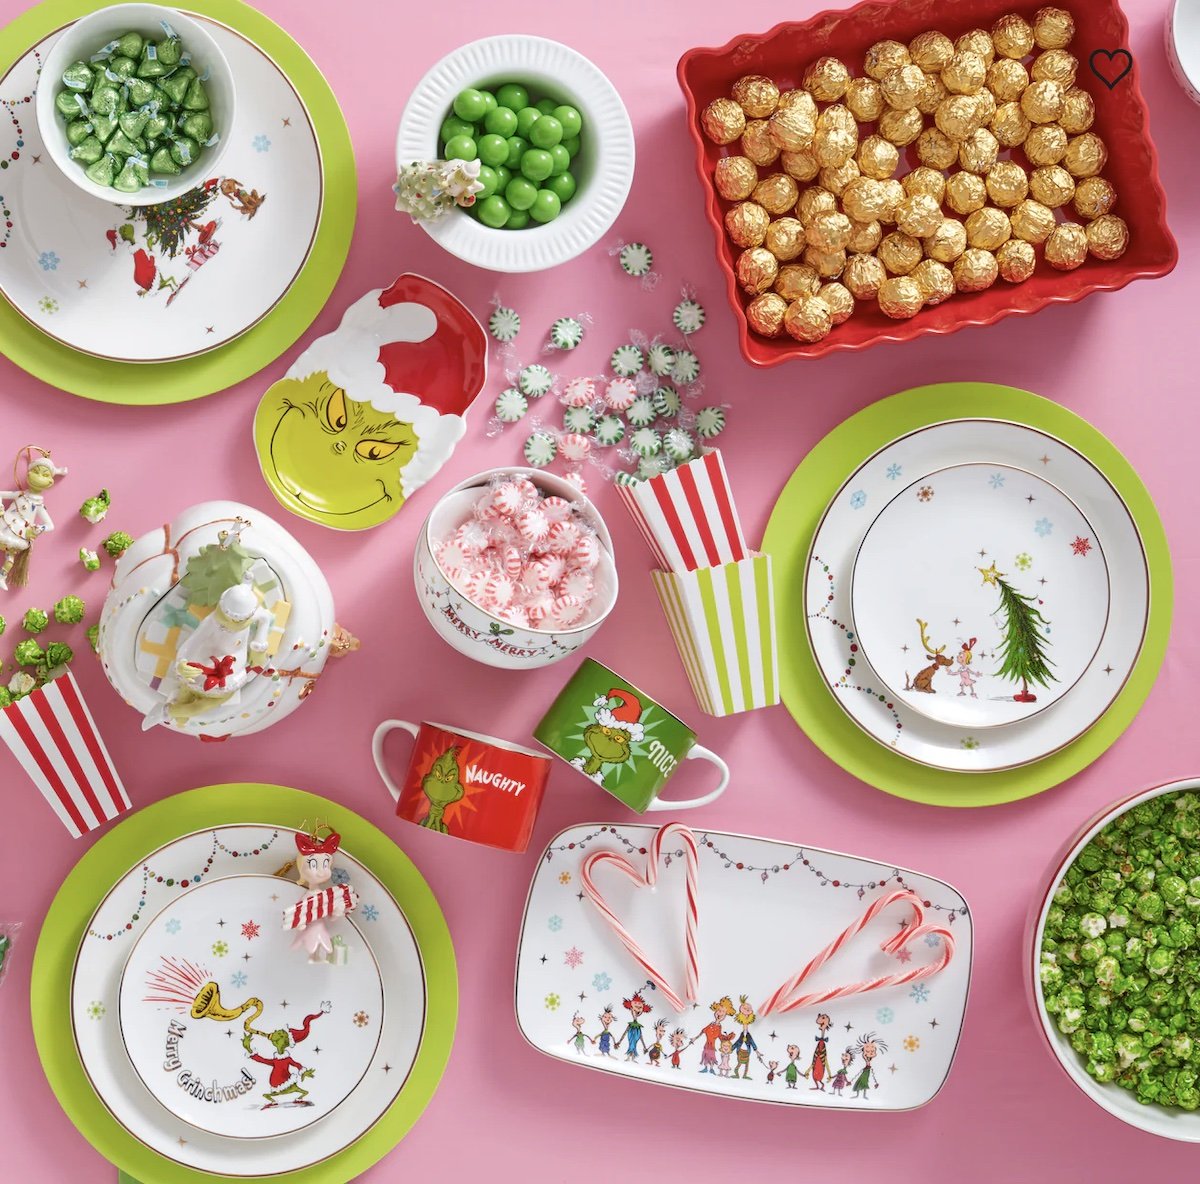 A collection of Grinch-themed items and holiday decor in a promo photo from Lenox